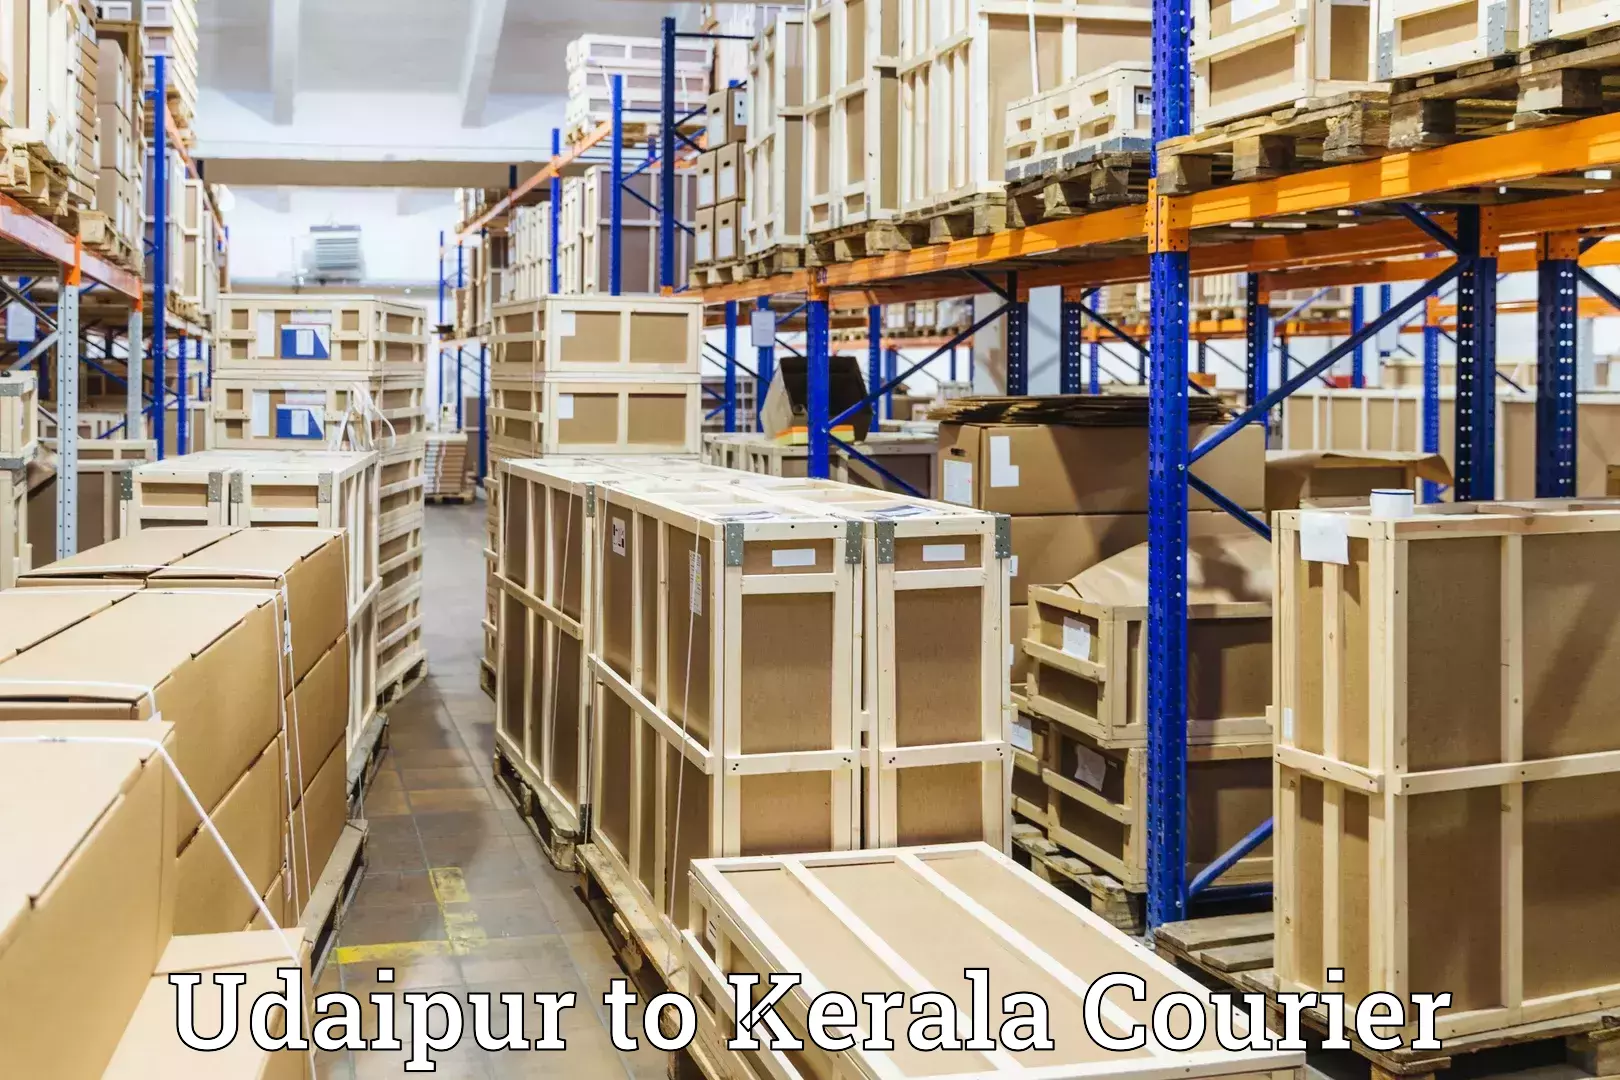 Luggage shipment specialists Udaipur to Perinthalmanna